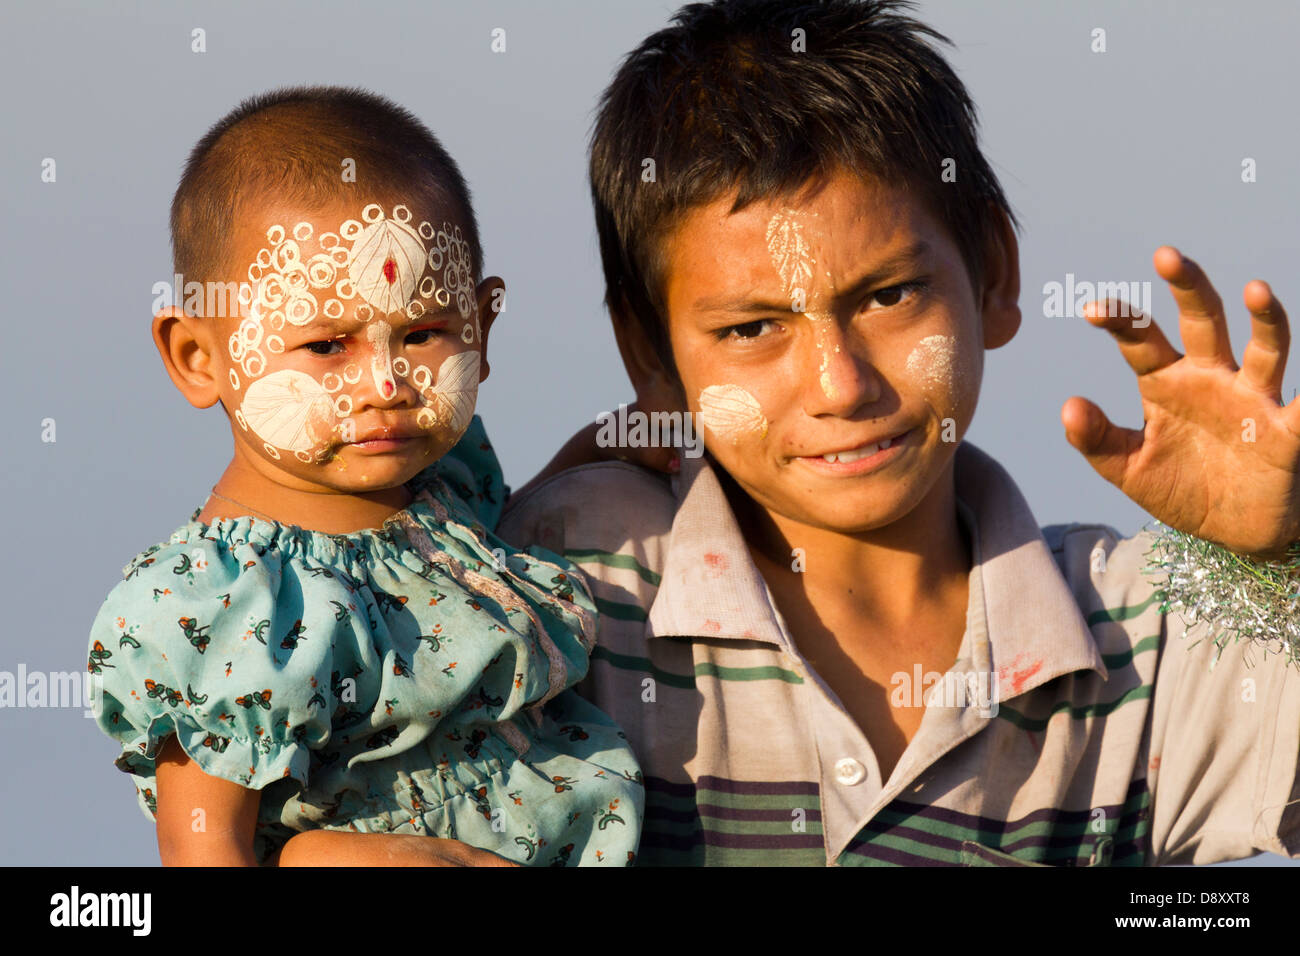 A young girl and boy with elaborate Thanaka face decoration by U Bein Teak Bridge Myanmar 2 Stock Photo